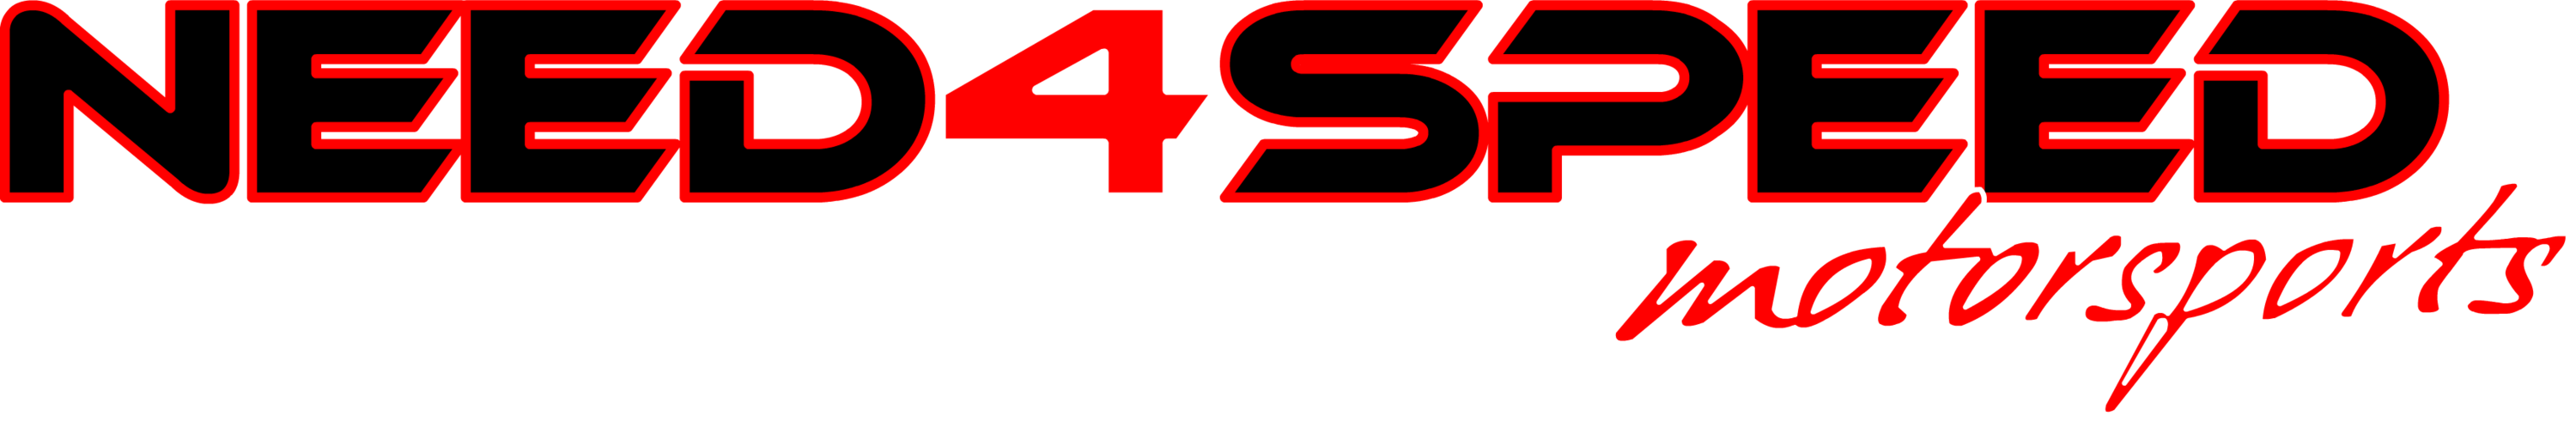 NEED4SPEED  logo_02_2.png